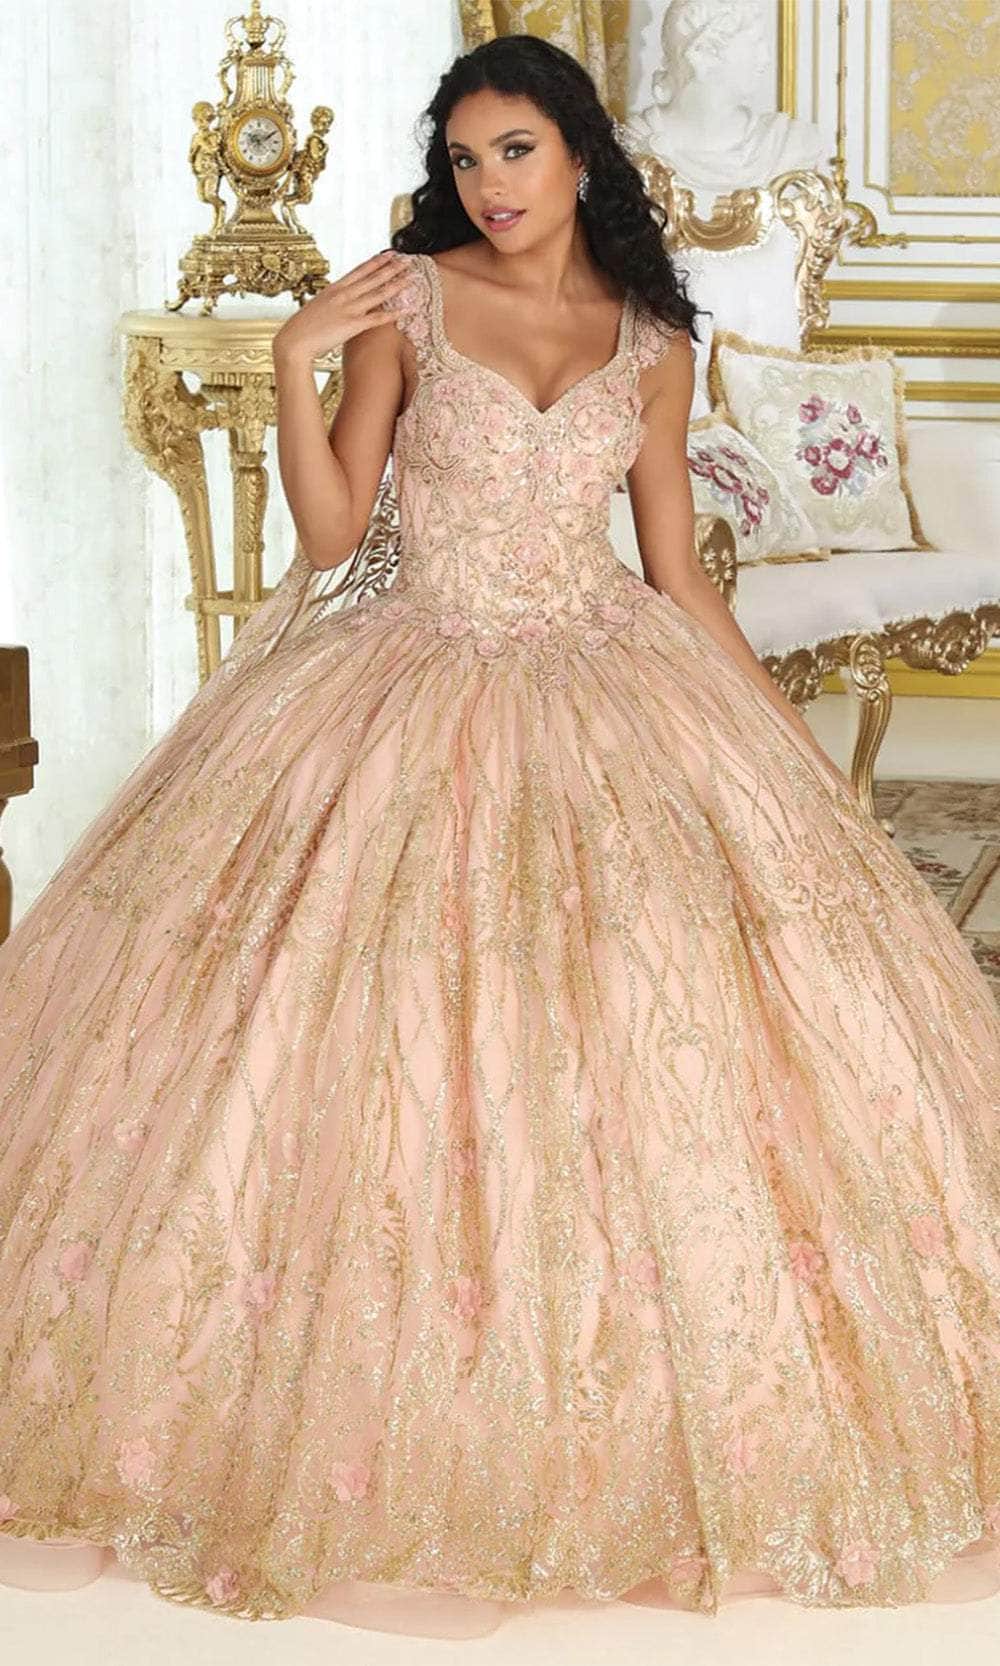 Image of May Queen LK207 - Floral Detailed Ballgown